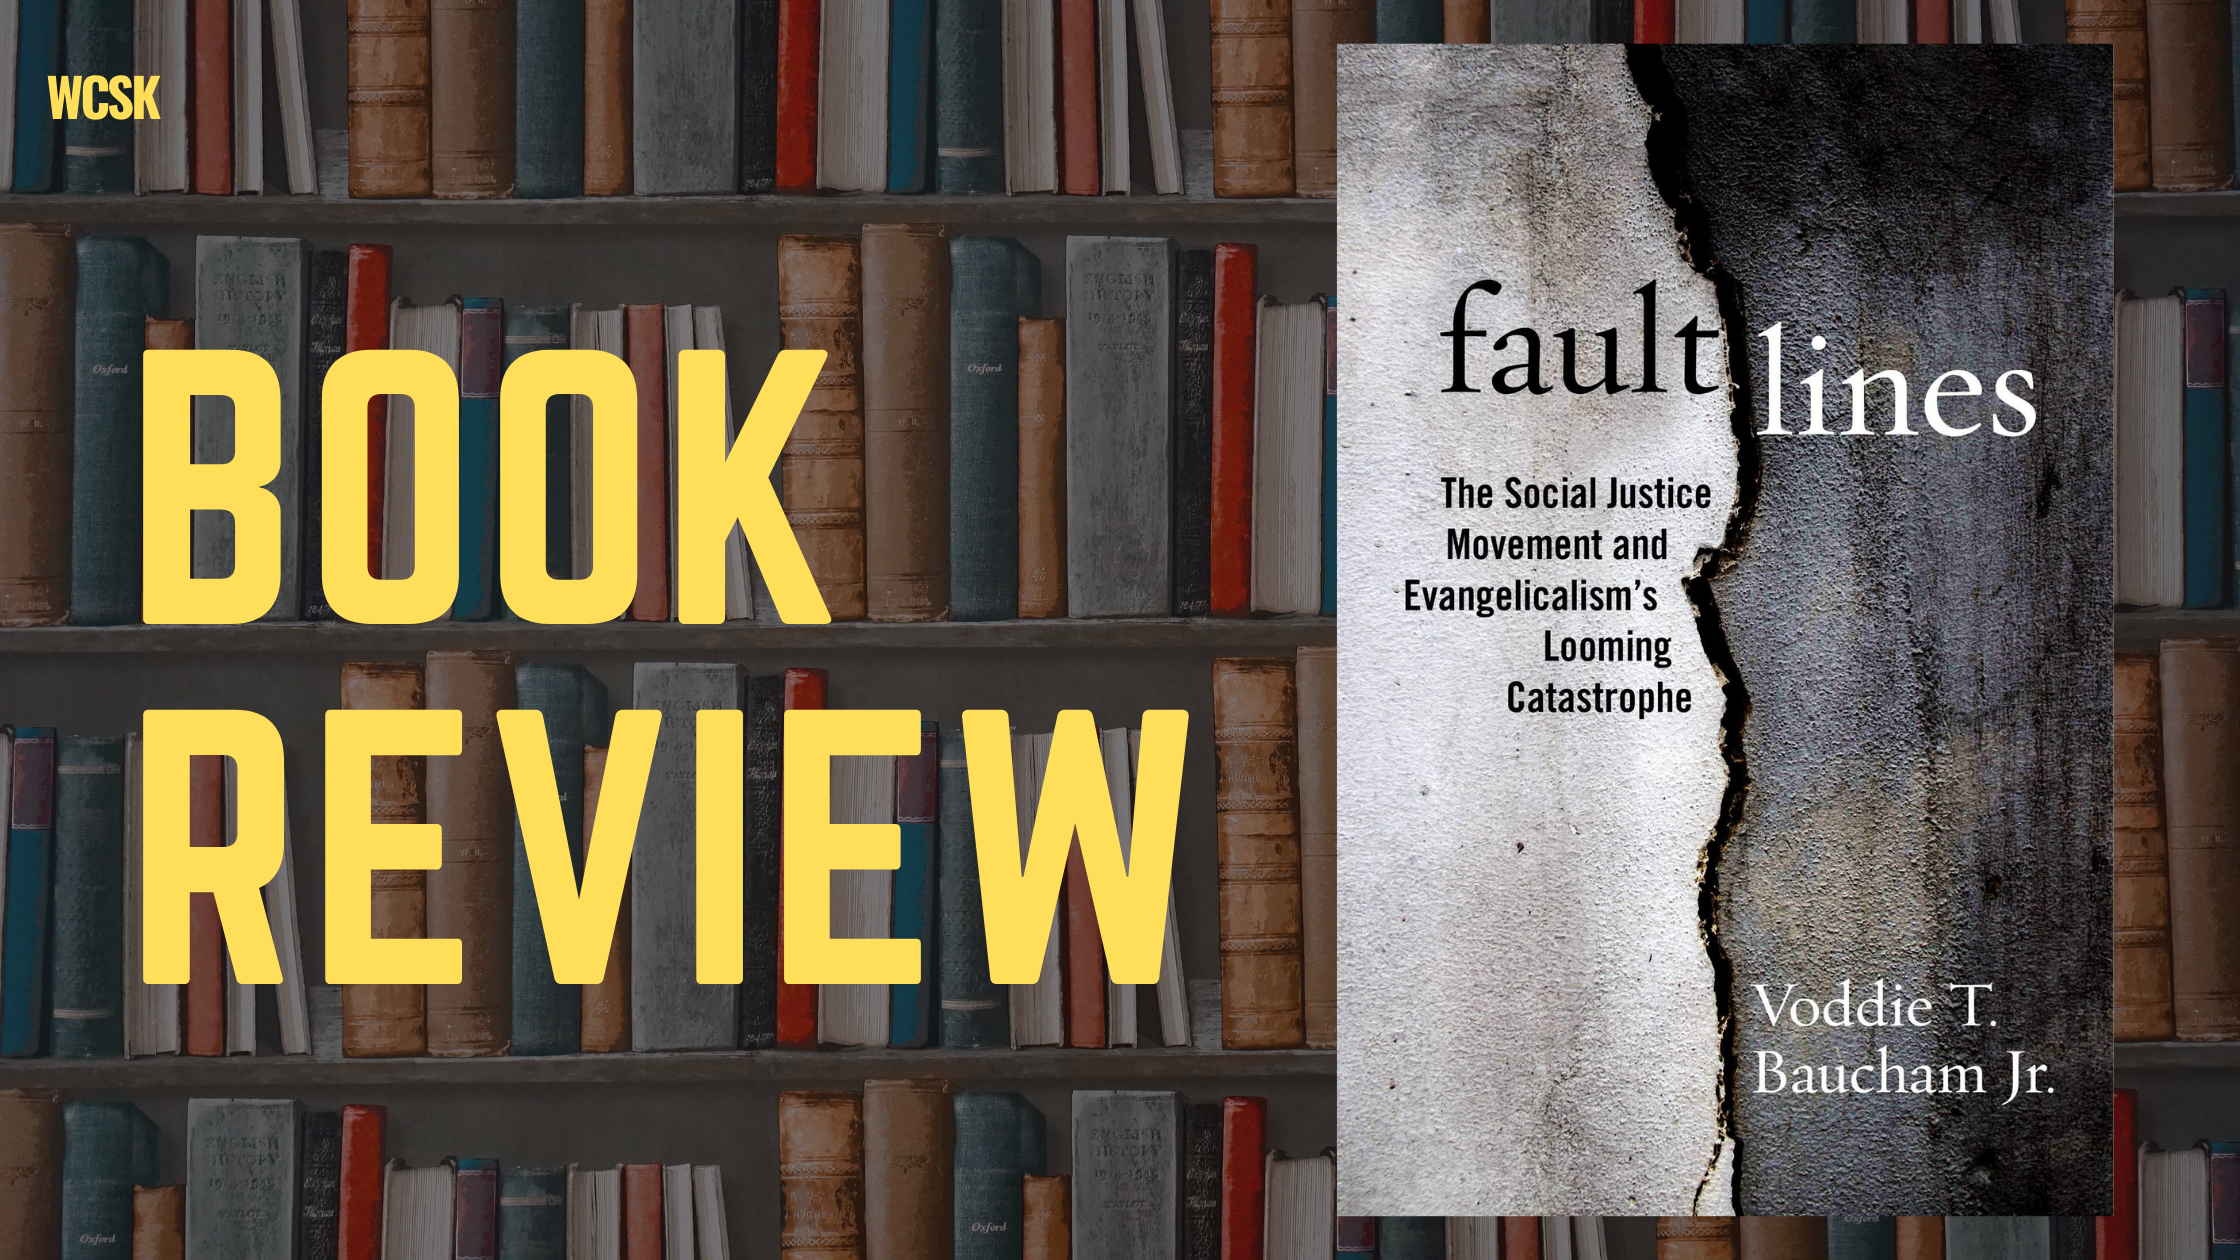 Book Review: Fault Lines by Voddie Baucham